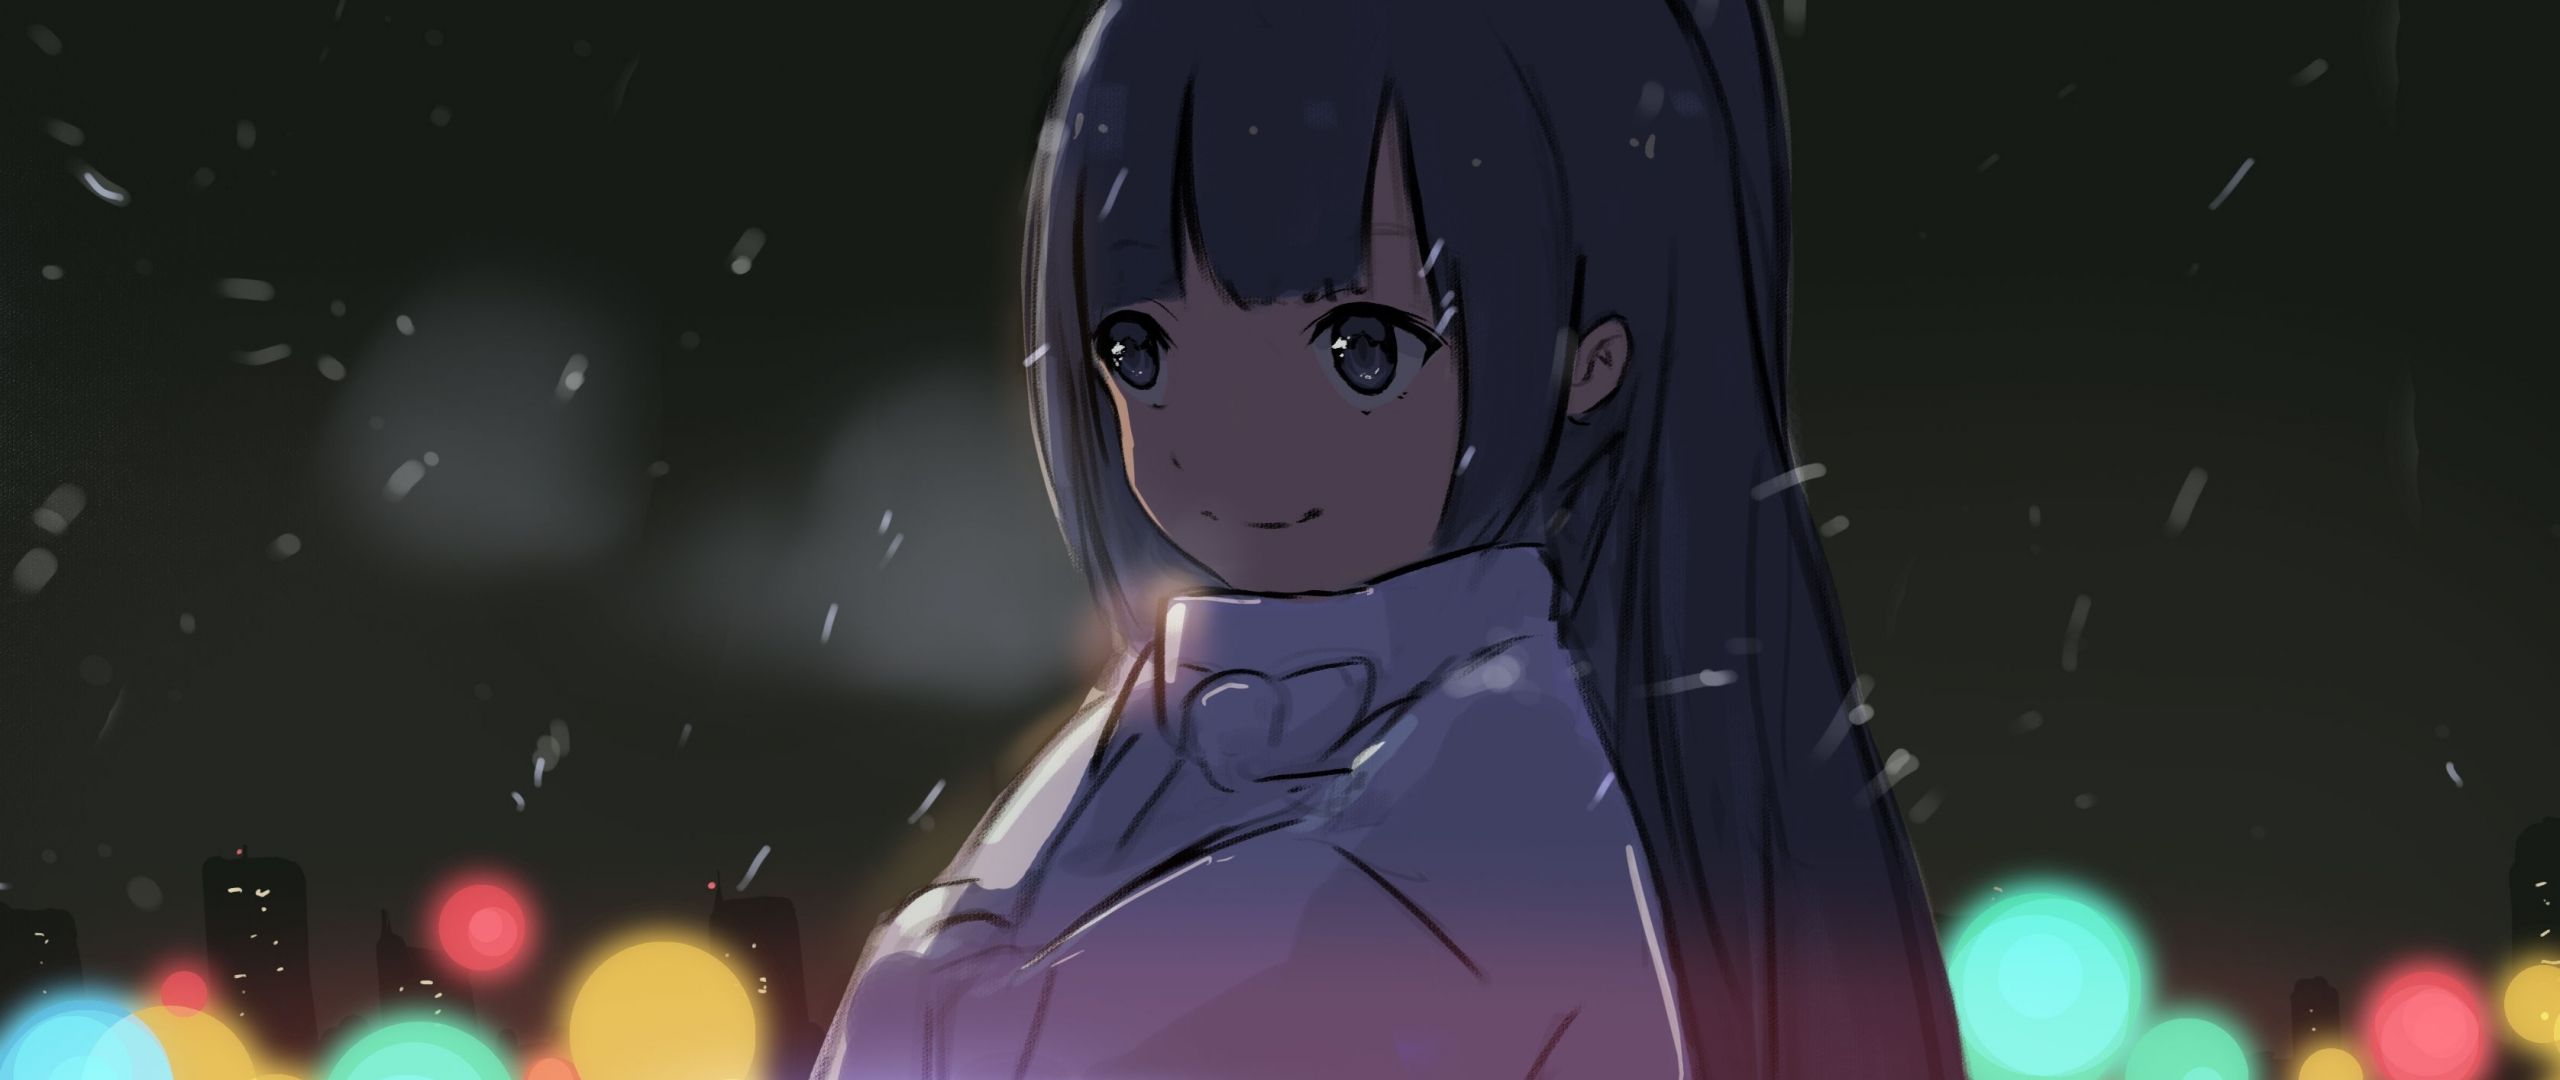 A girl with long hair is standing in front of some lights - Anime girl